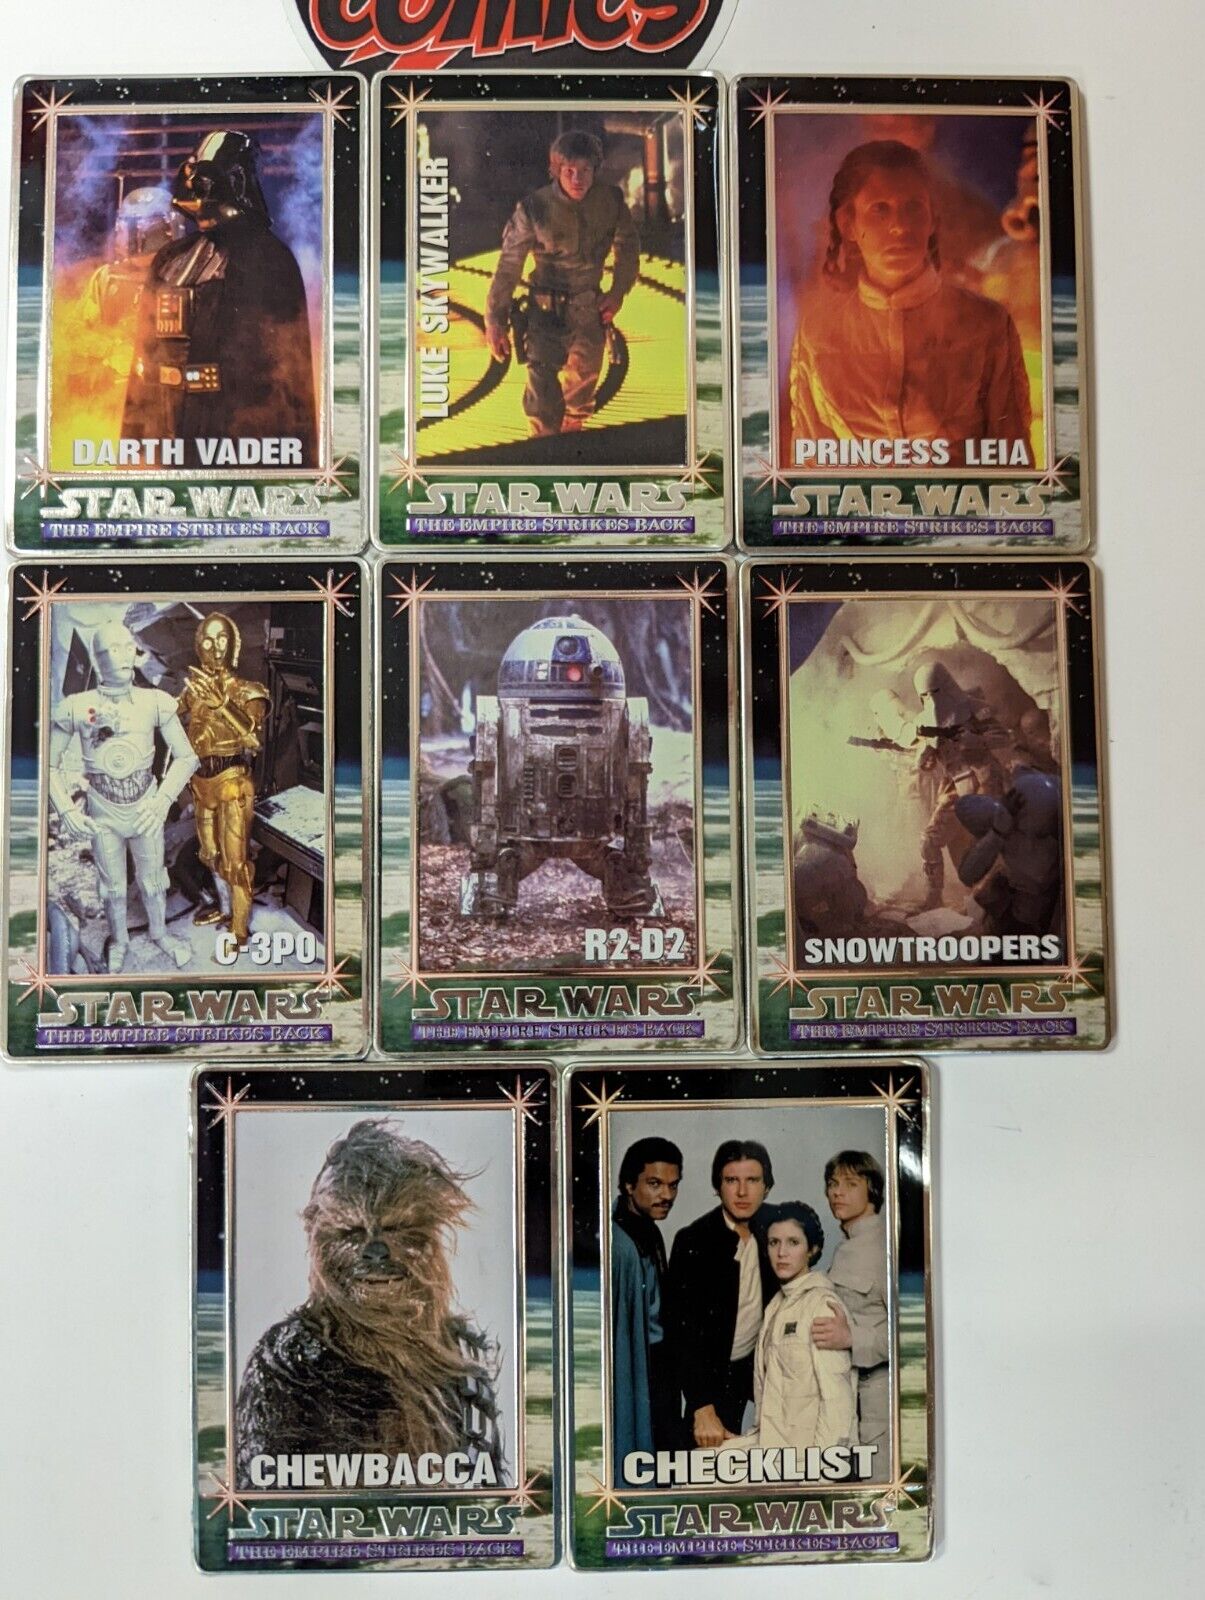 Star Wars Empire Strikes Back Series 2 Metallic Impressions Collector Cards